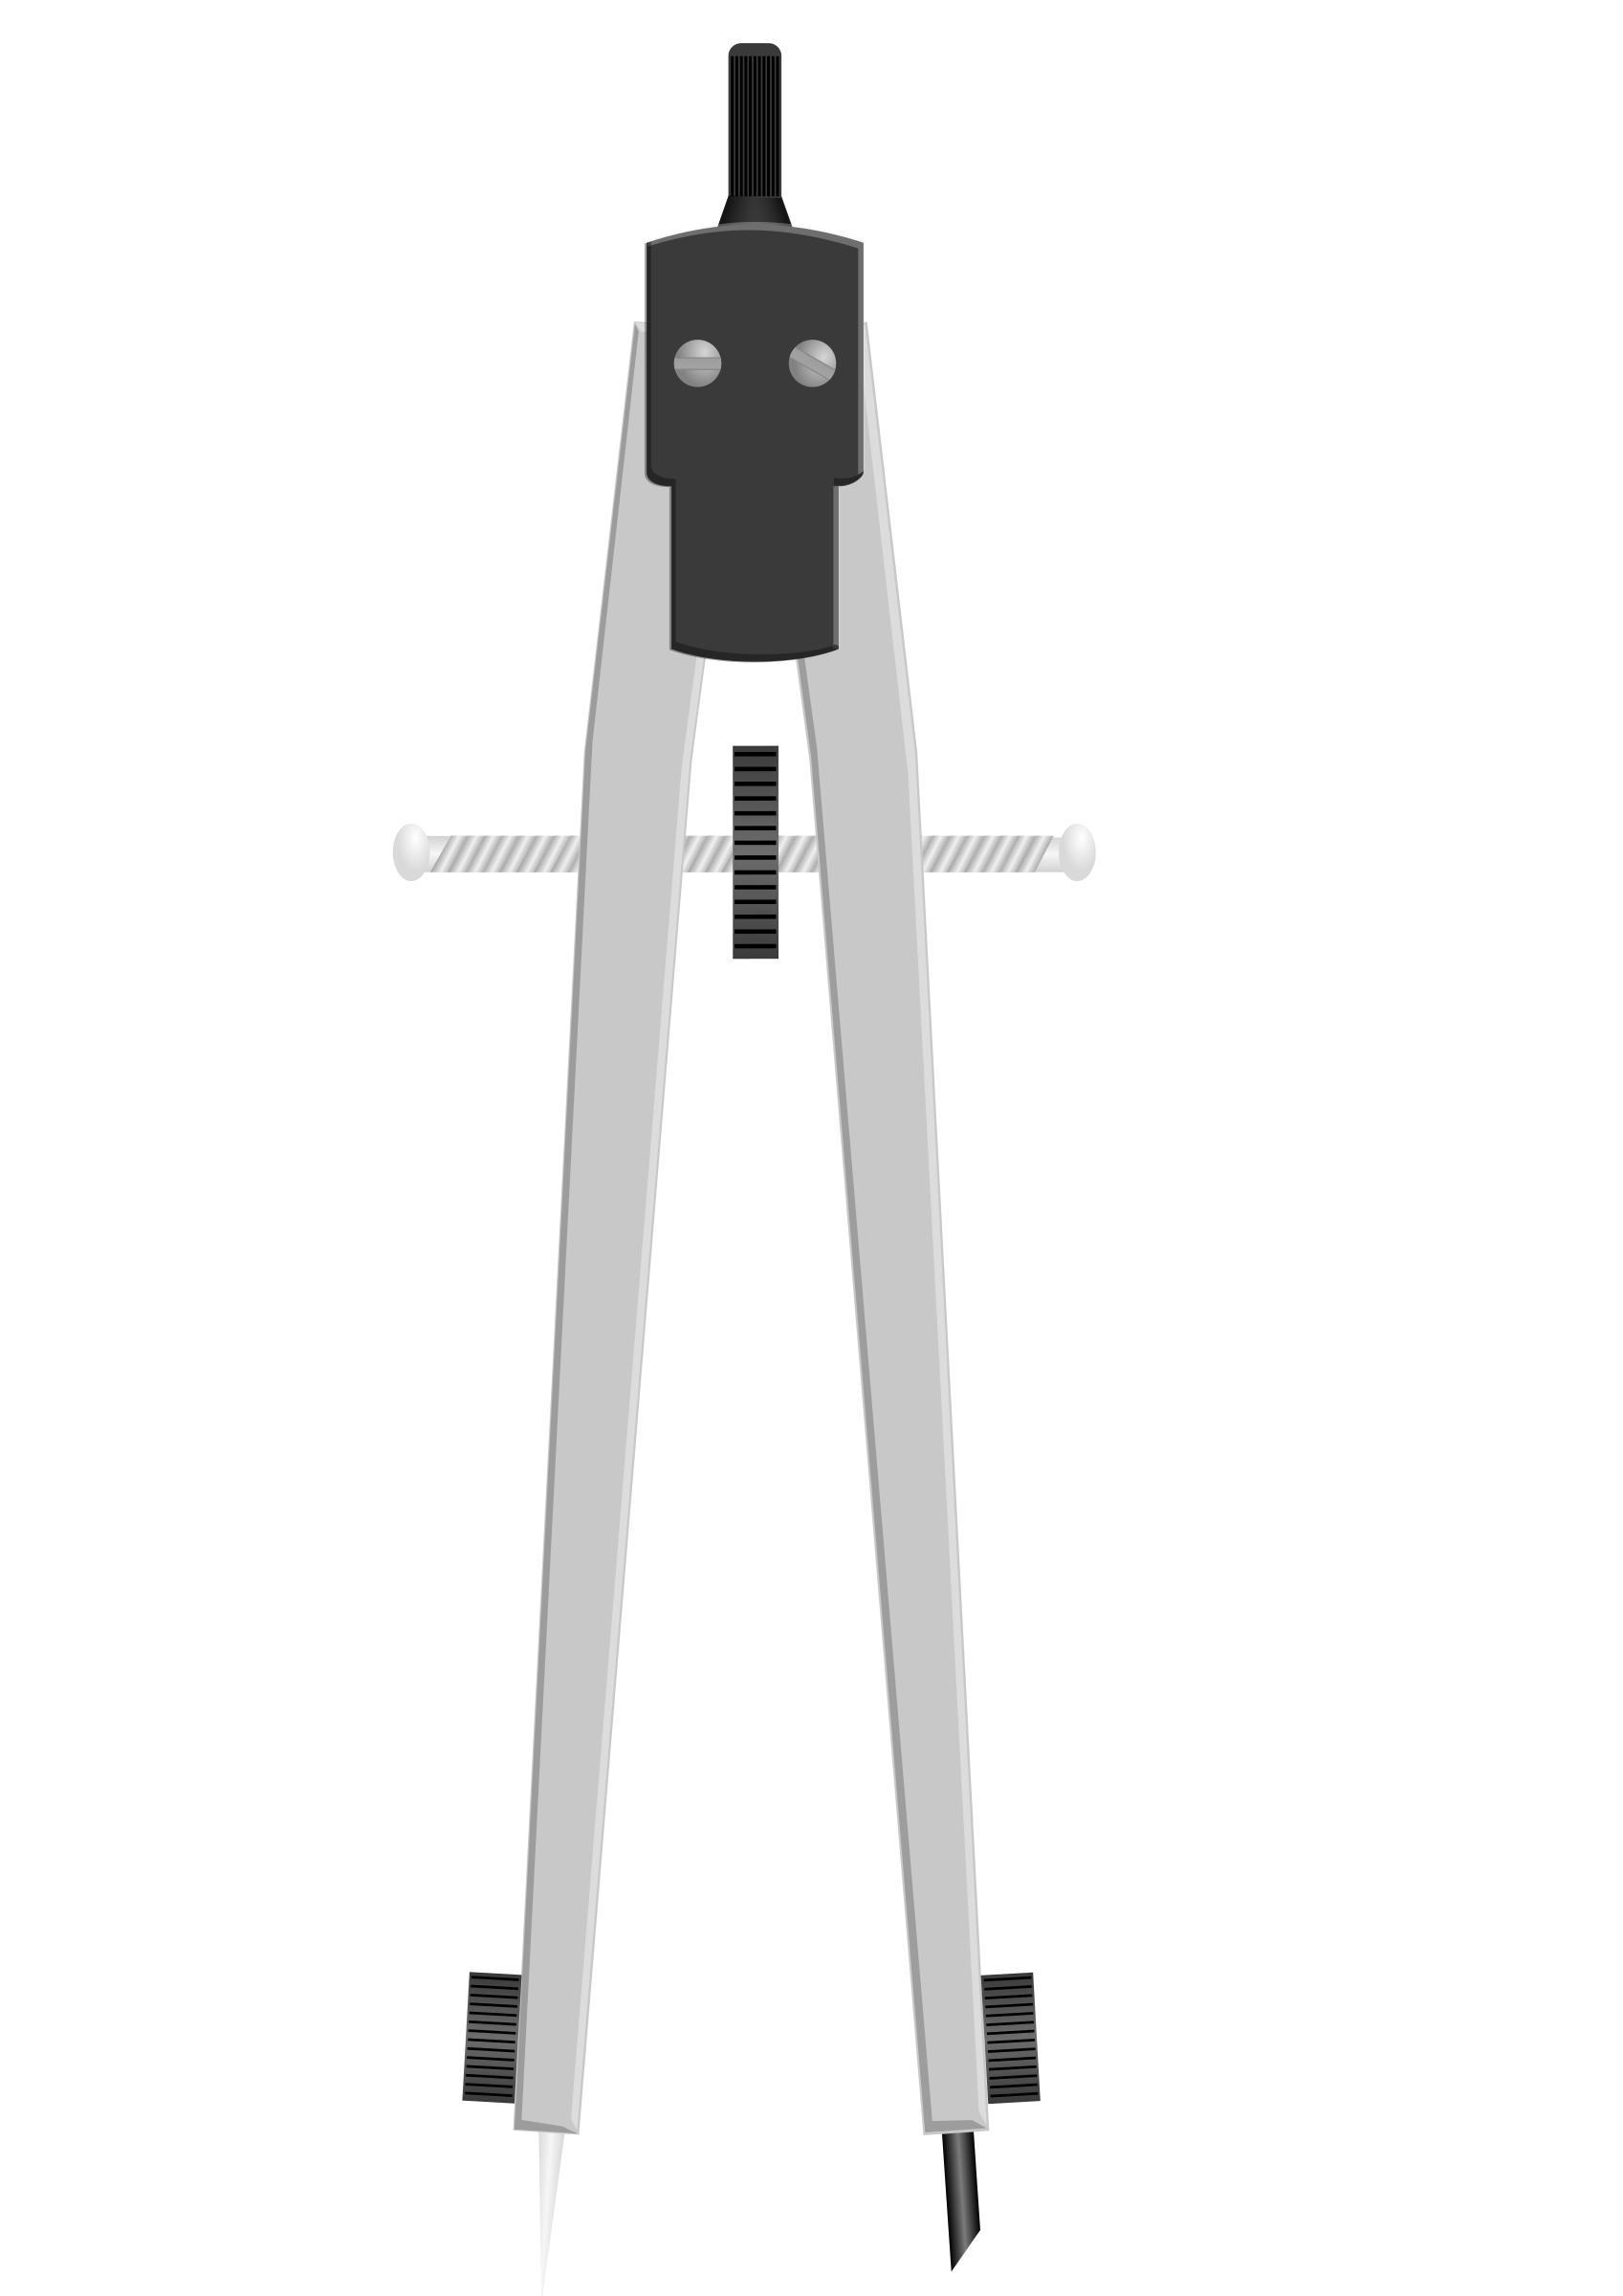 tool clipart divider